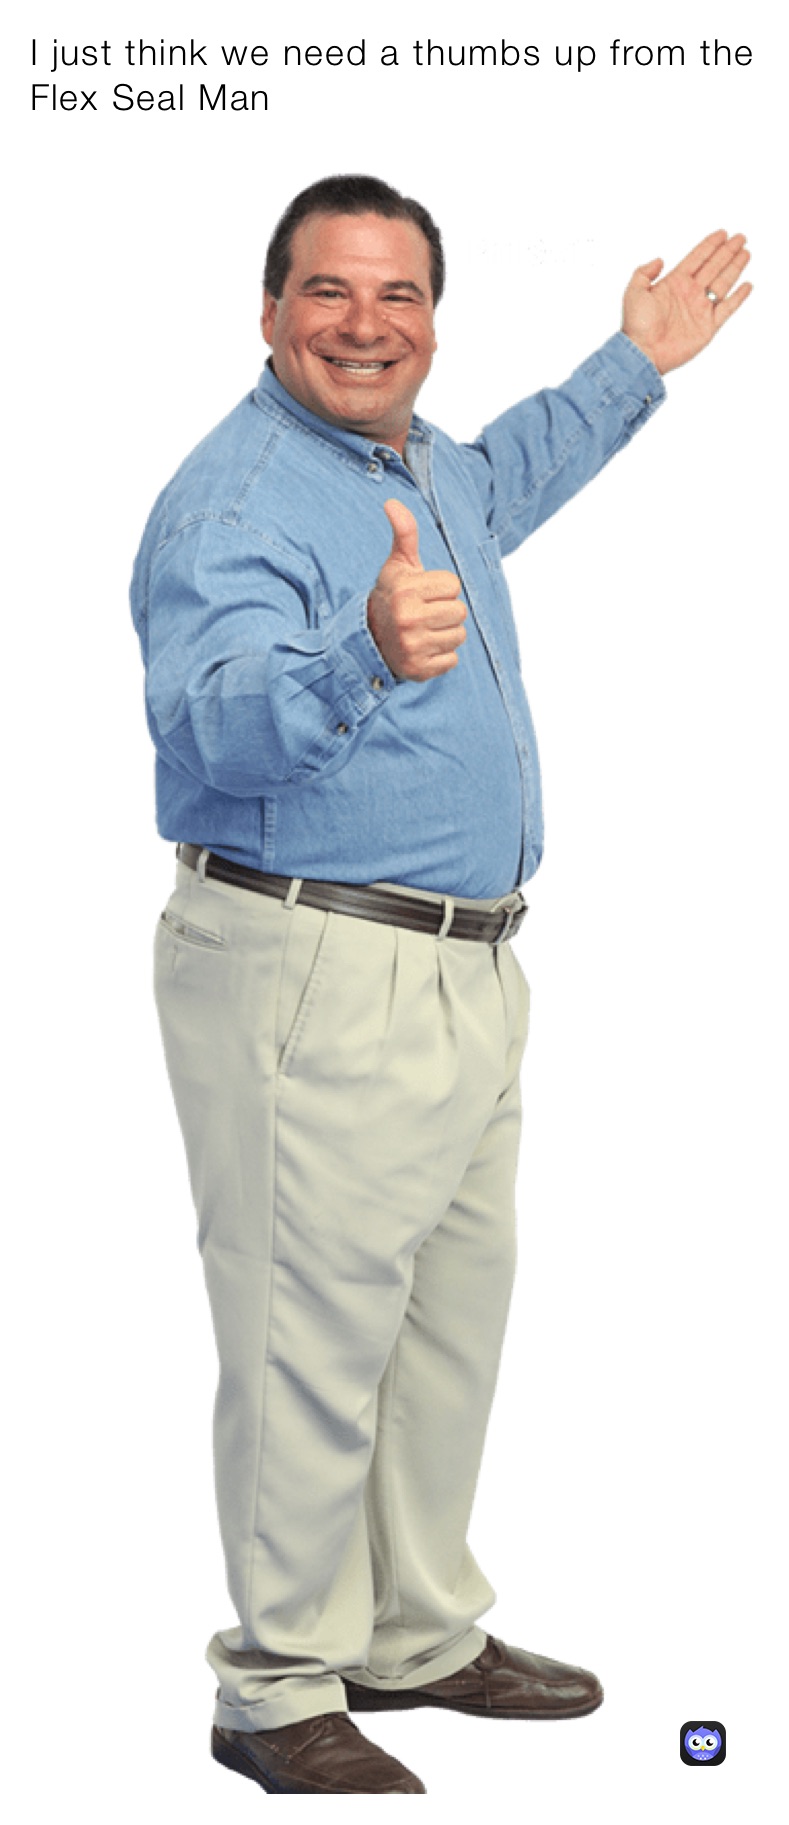 I just think we need a thumbs up from the Flex Seal Man